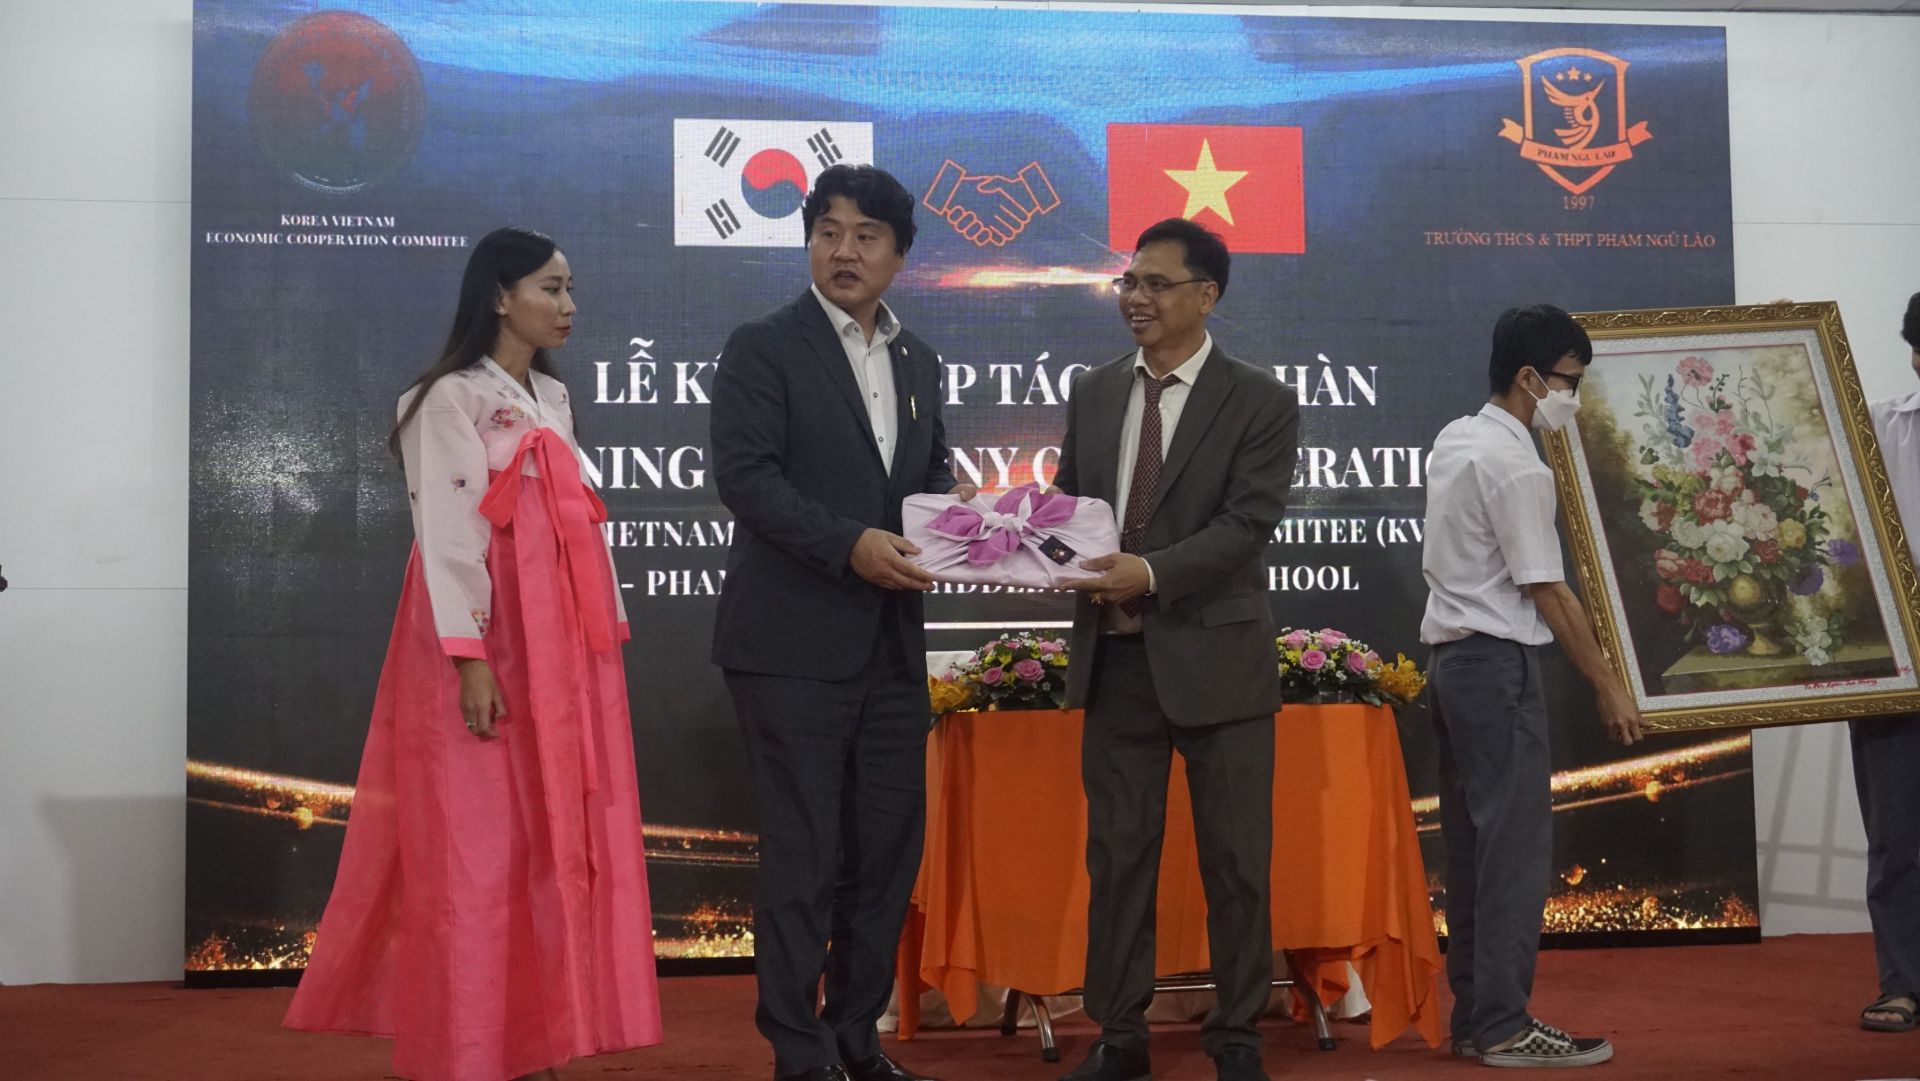 Mr. Vu Khac Hiep - the Board of Directors of the school and Mr. Kwon Jae Haeng - Chairman of the Korea -Vietnam Economic Support Committee awarded souvenirs.